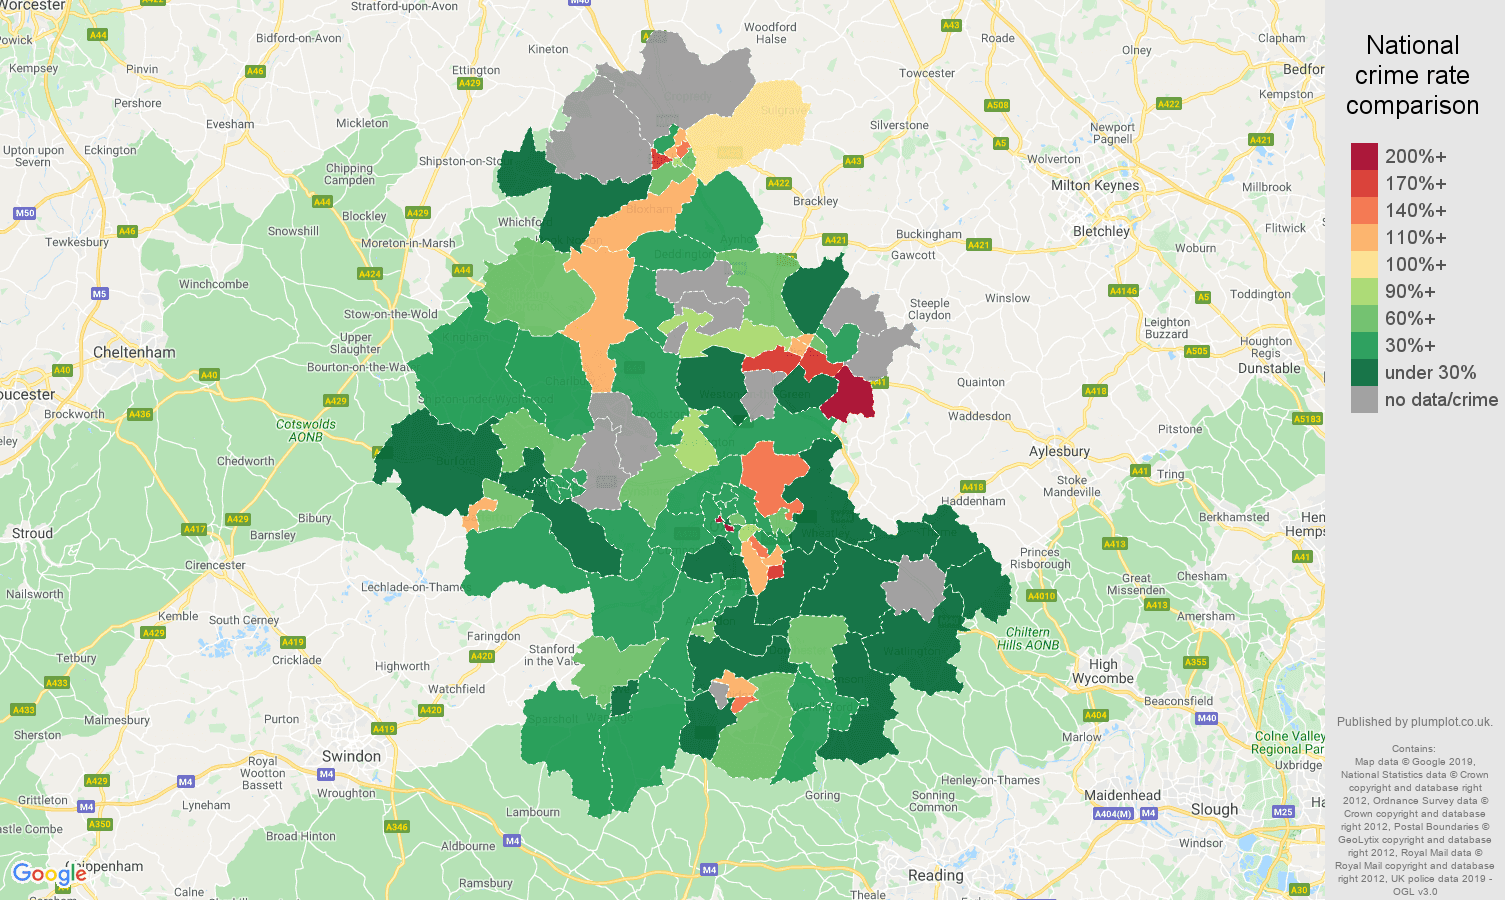 Oxford other crime rate comparison map